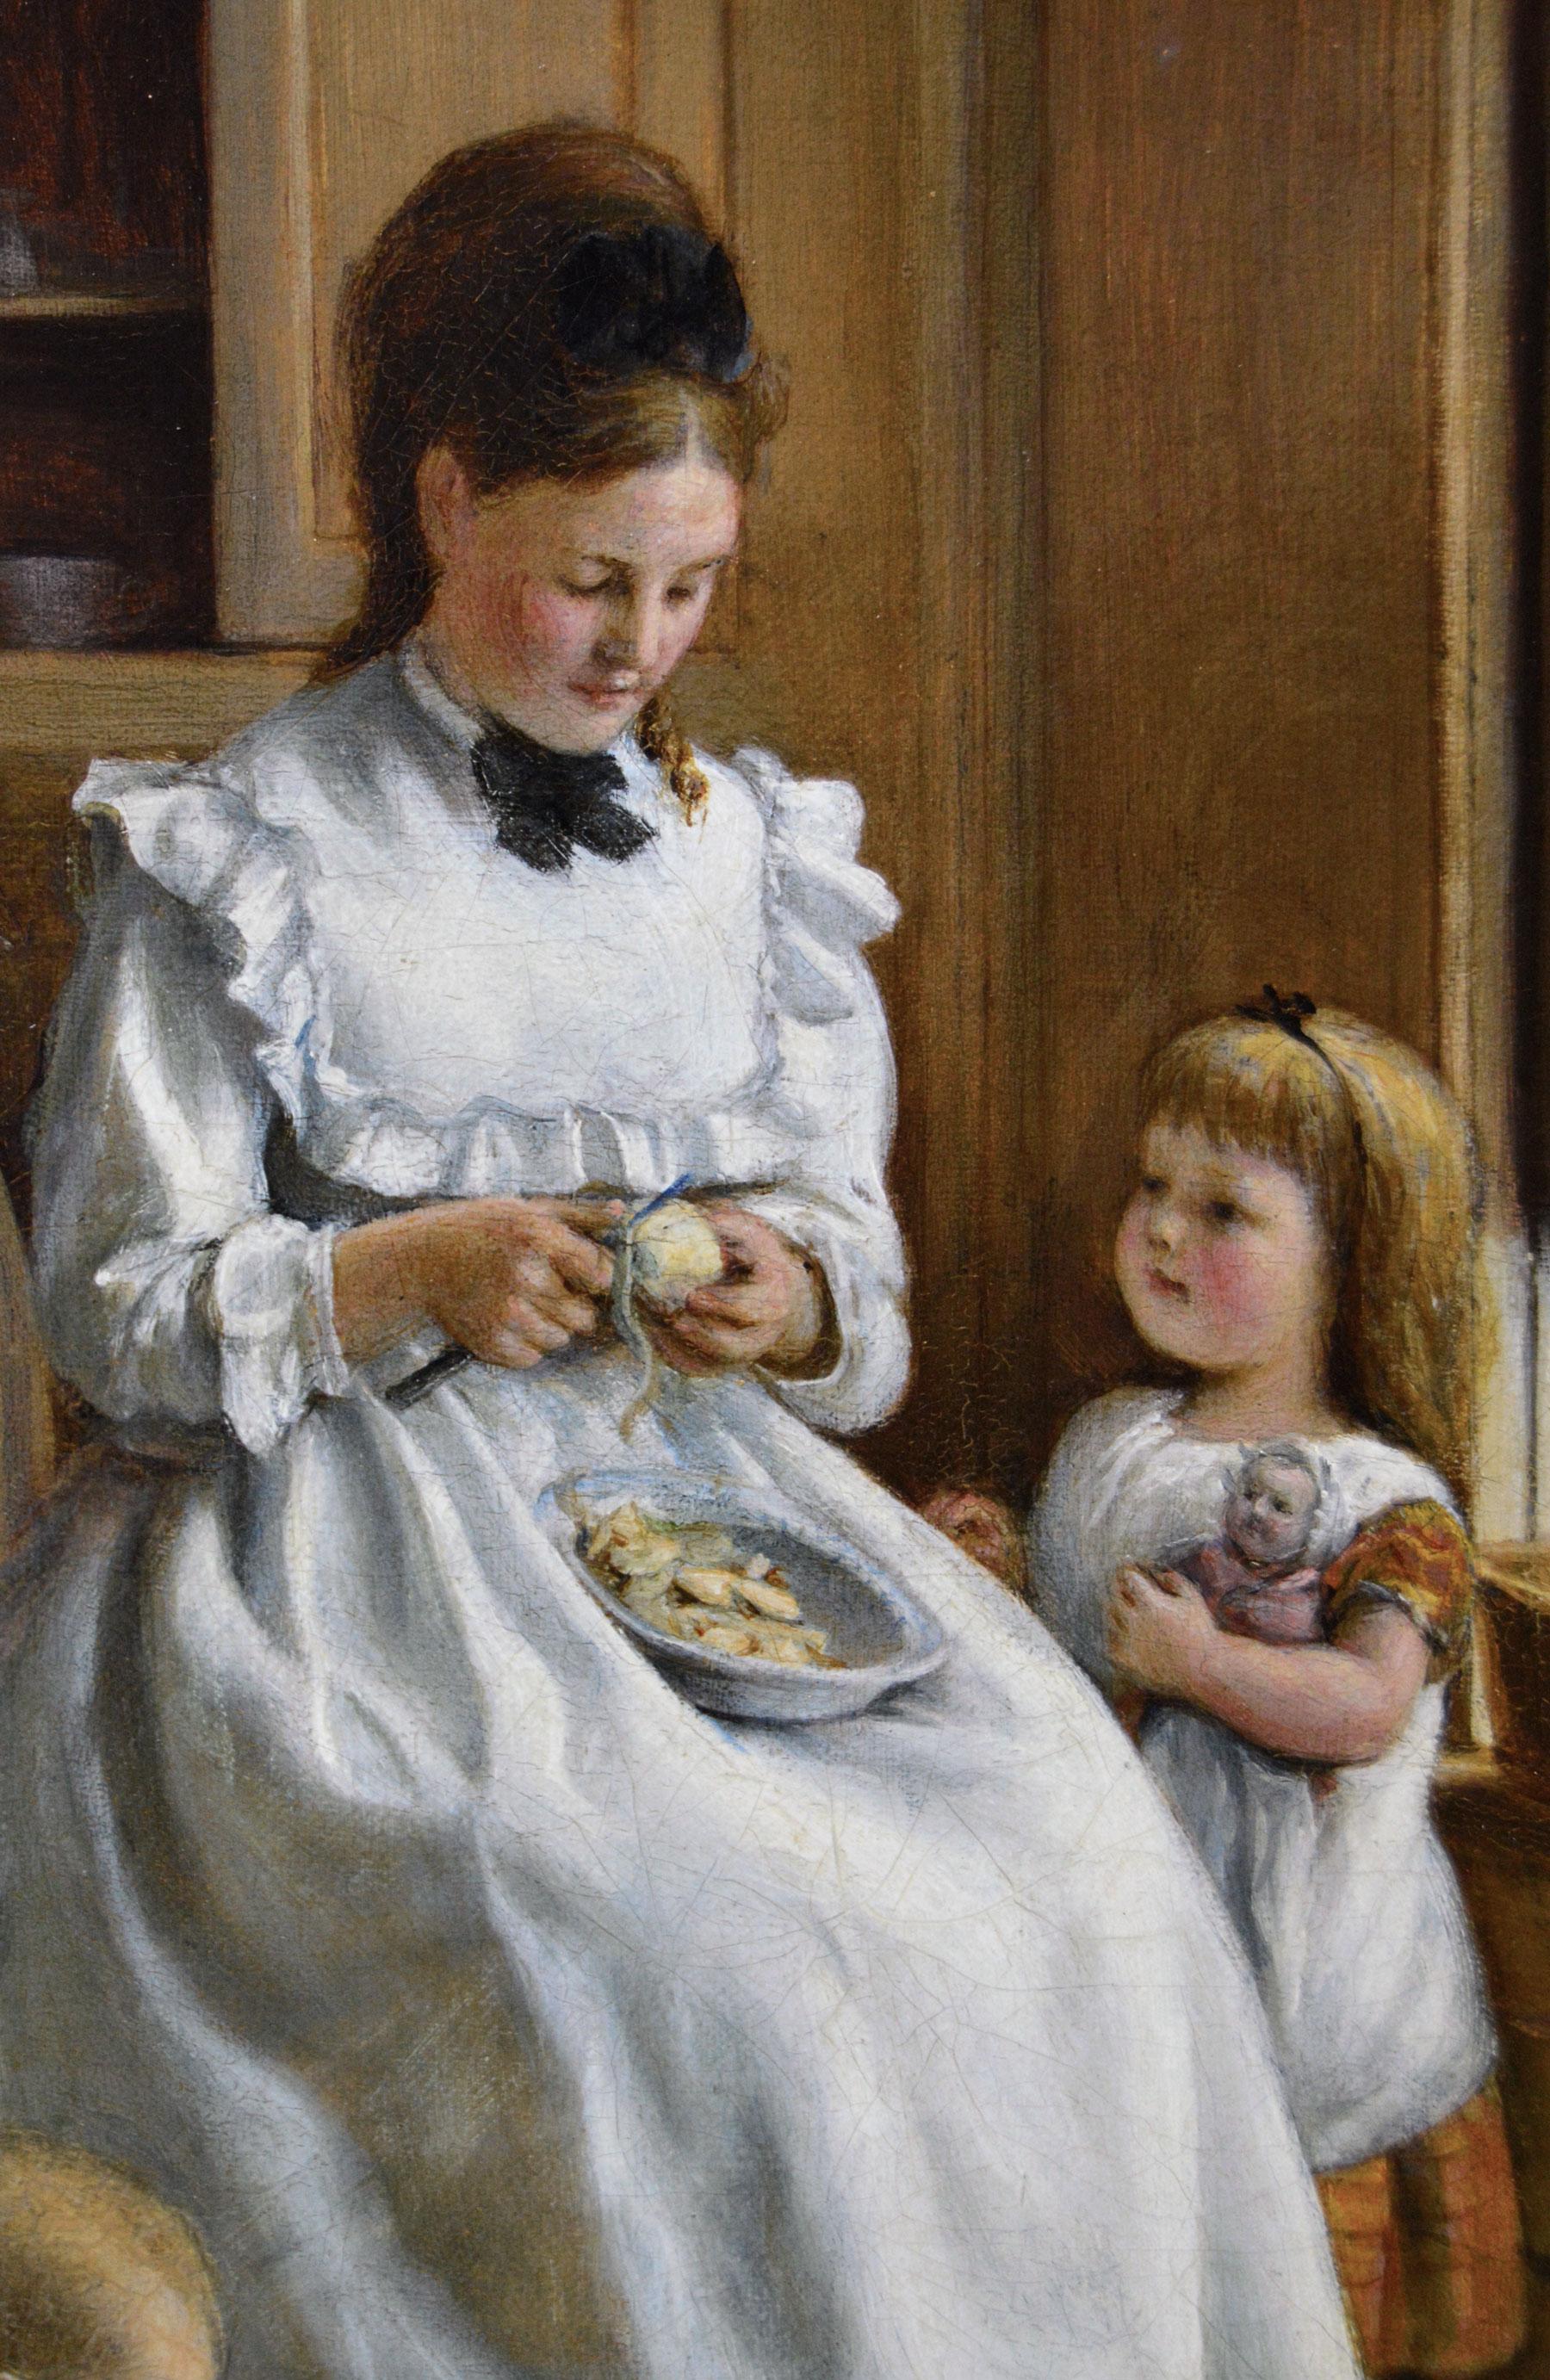 19th Century genre oil painting of a woman peeling apples with her daughters - Brown Figurative Painting by Joseph Clark